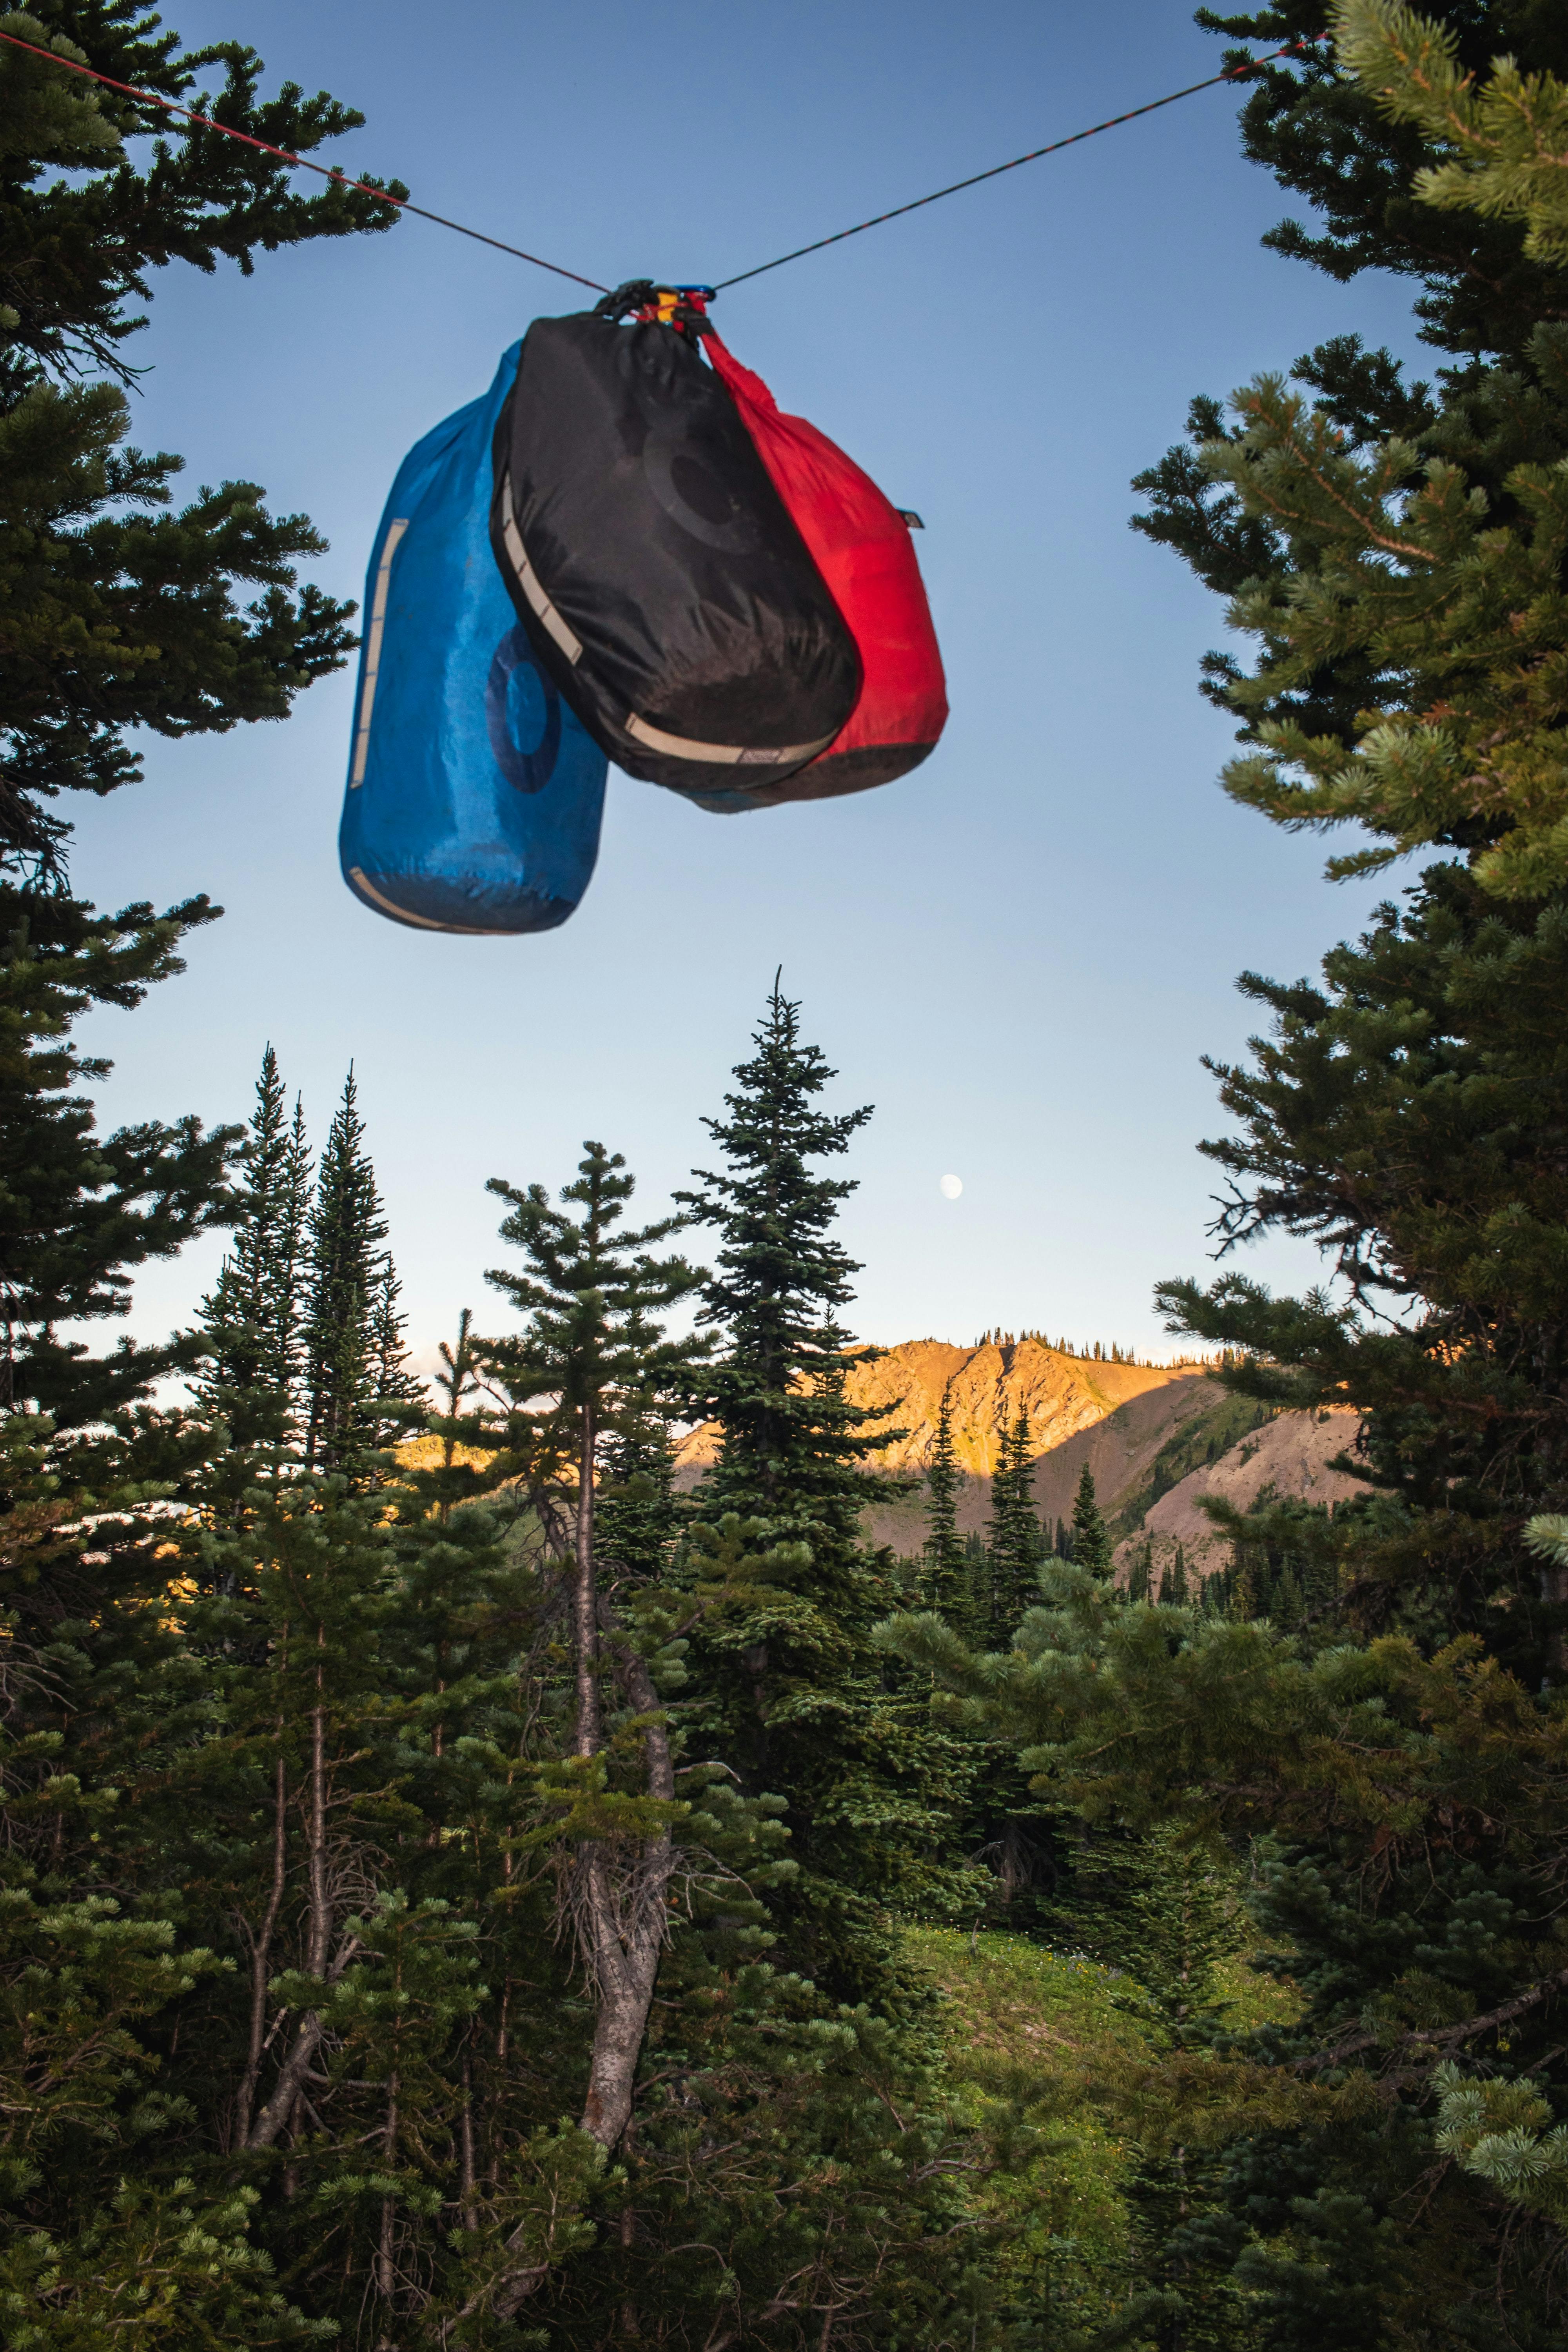 Three bear bags hang high between two trees in the backcountry. The bags are black, blue, and red.